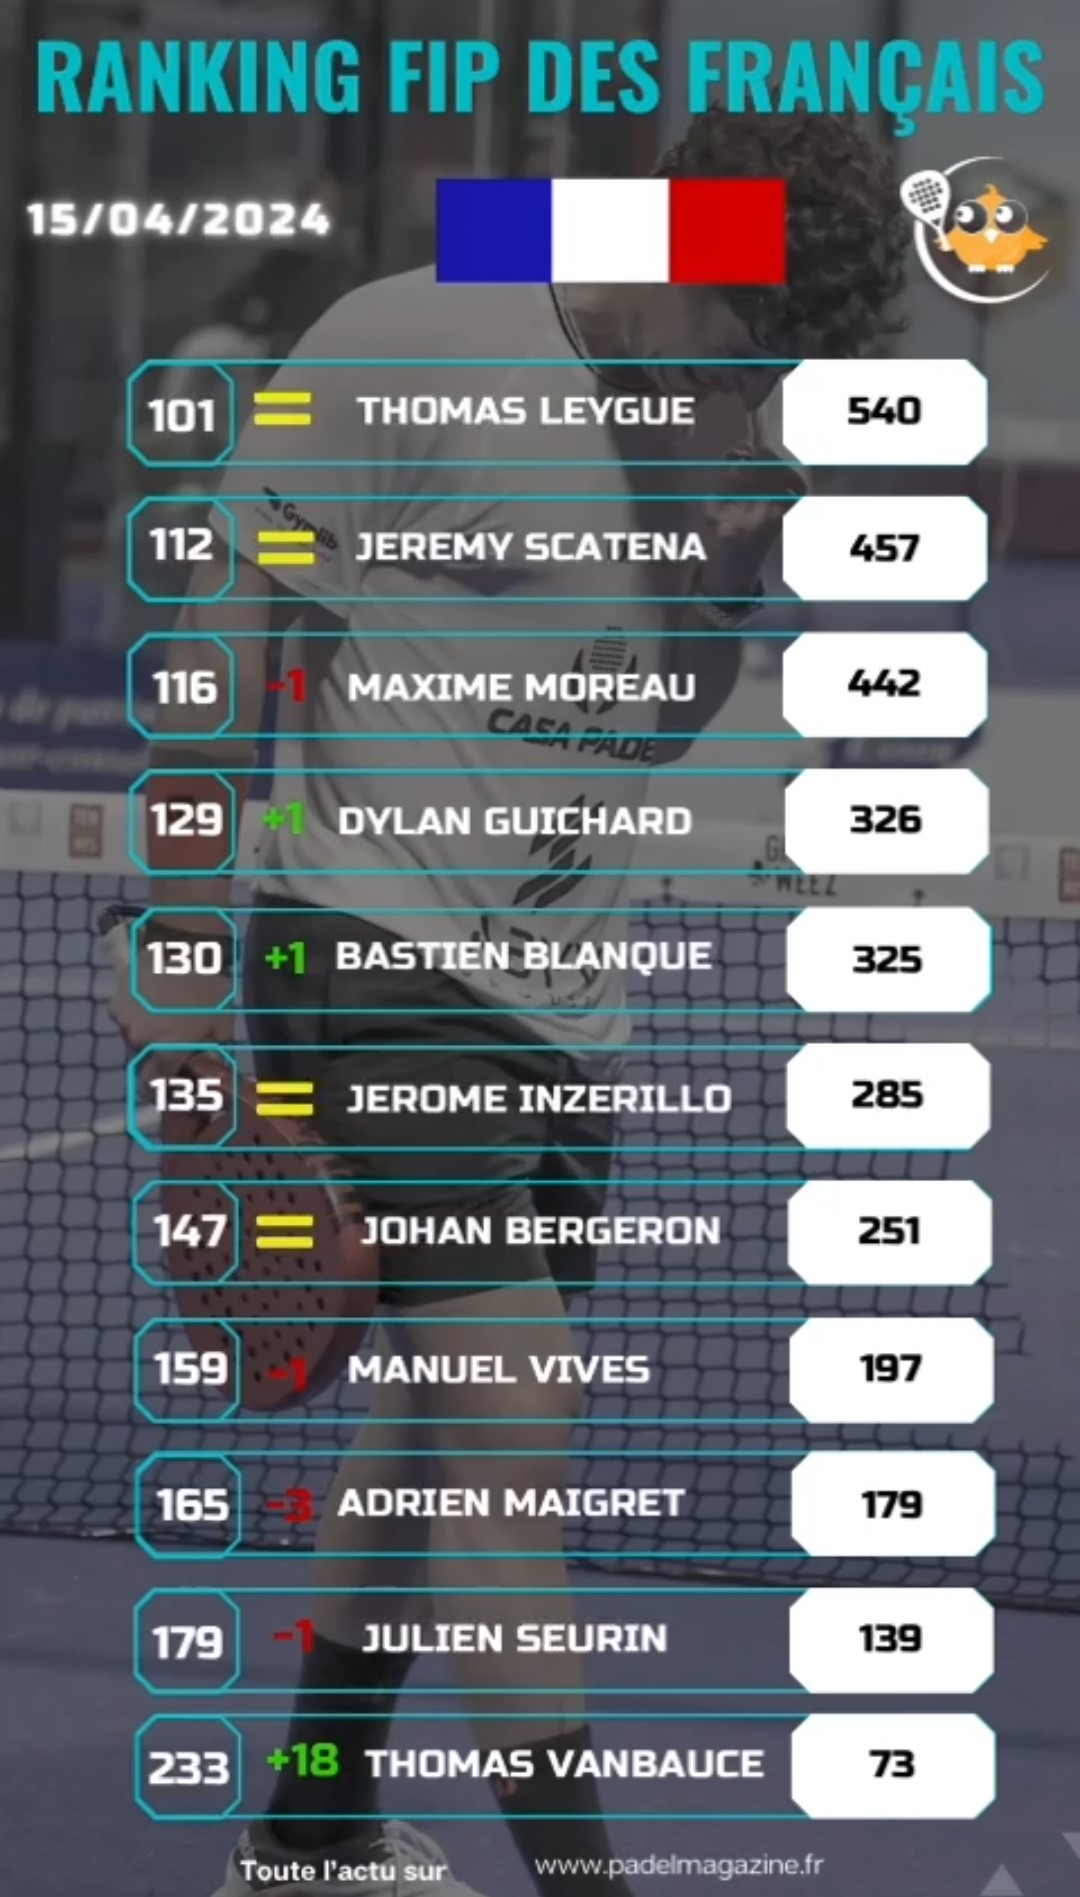 French FIP ranking